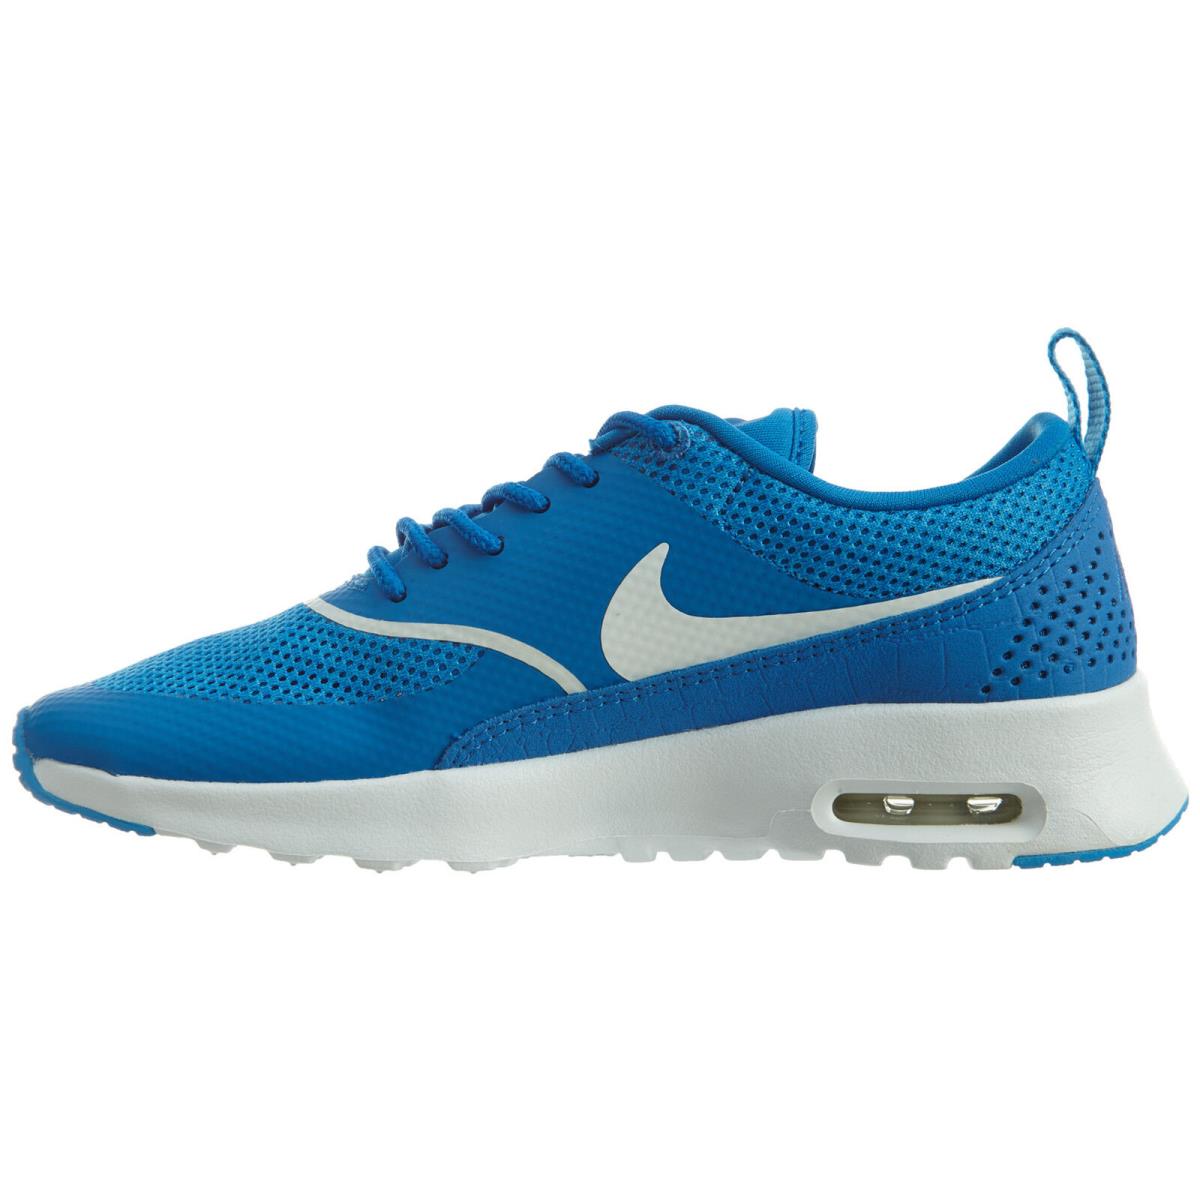 Nike Air Max Thea Womens 599409-413 Blue Spark Glow White Running Shoes  Size 6 زخارف اطفال